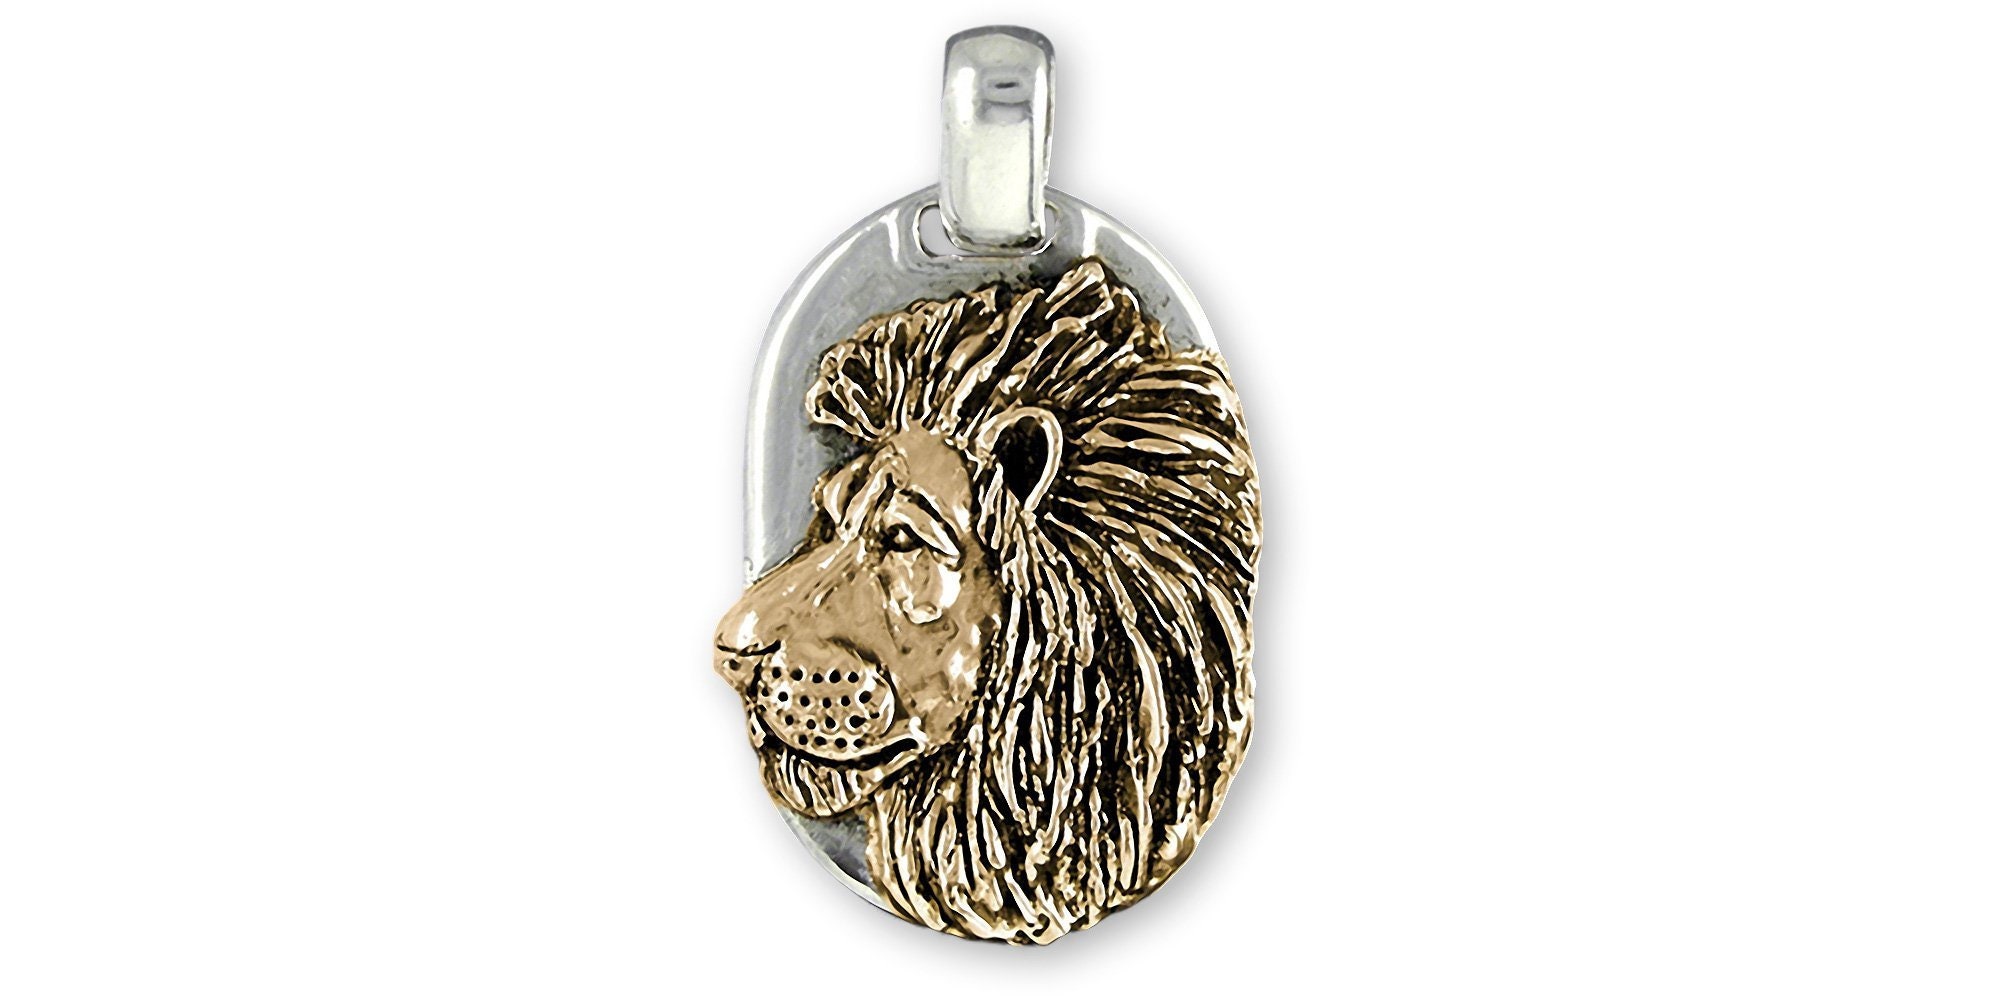 Lion Mini Dog Tag Necklace  Fine jewelry solid silver gold-finish necklaces  bracelets earrings